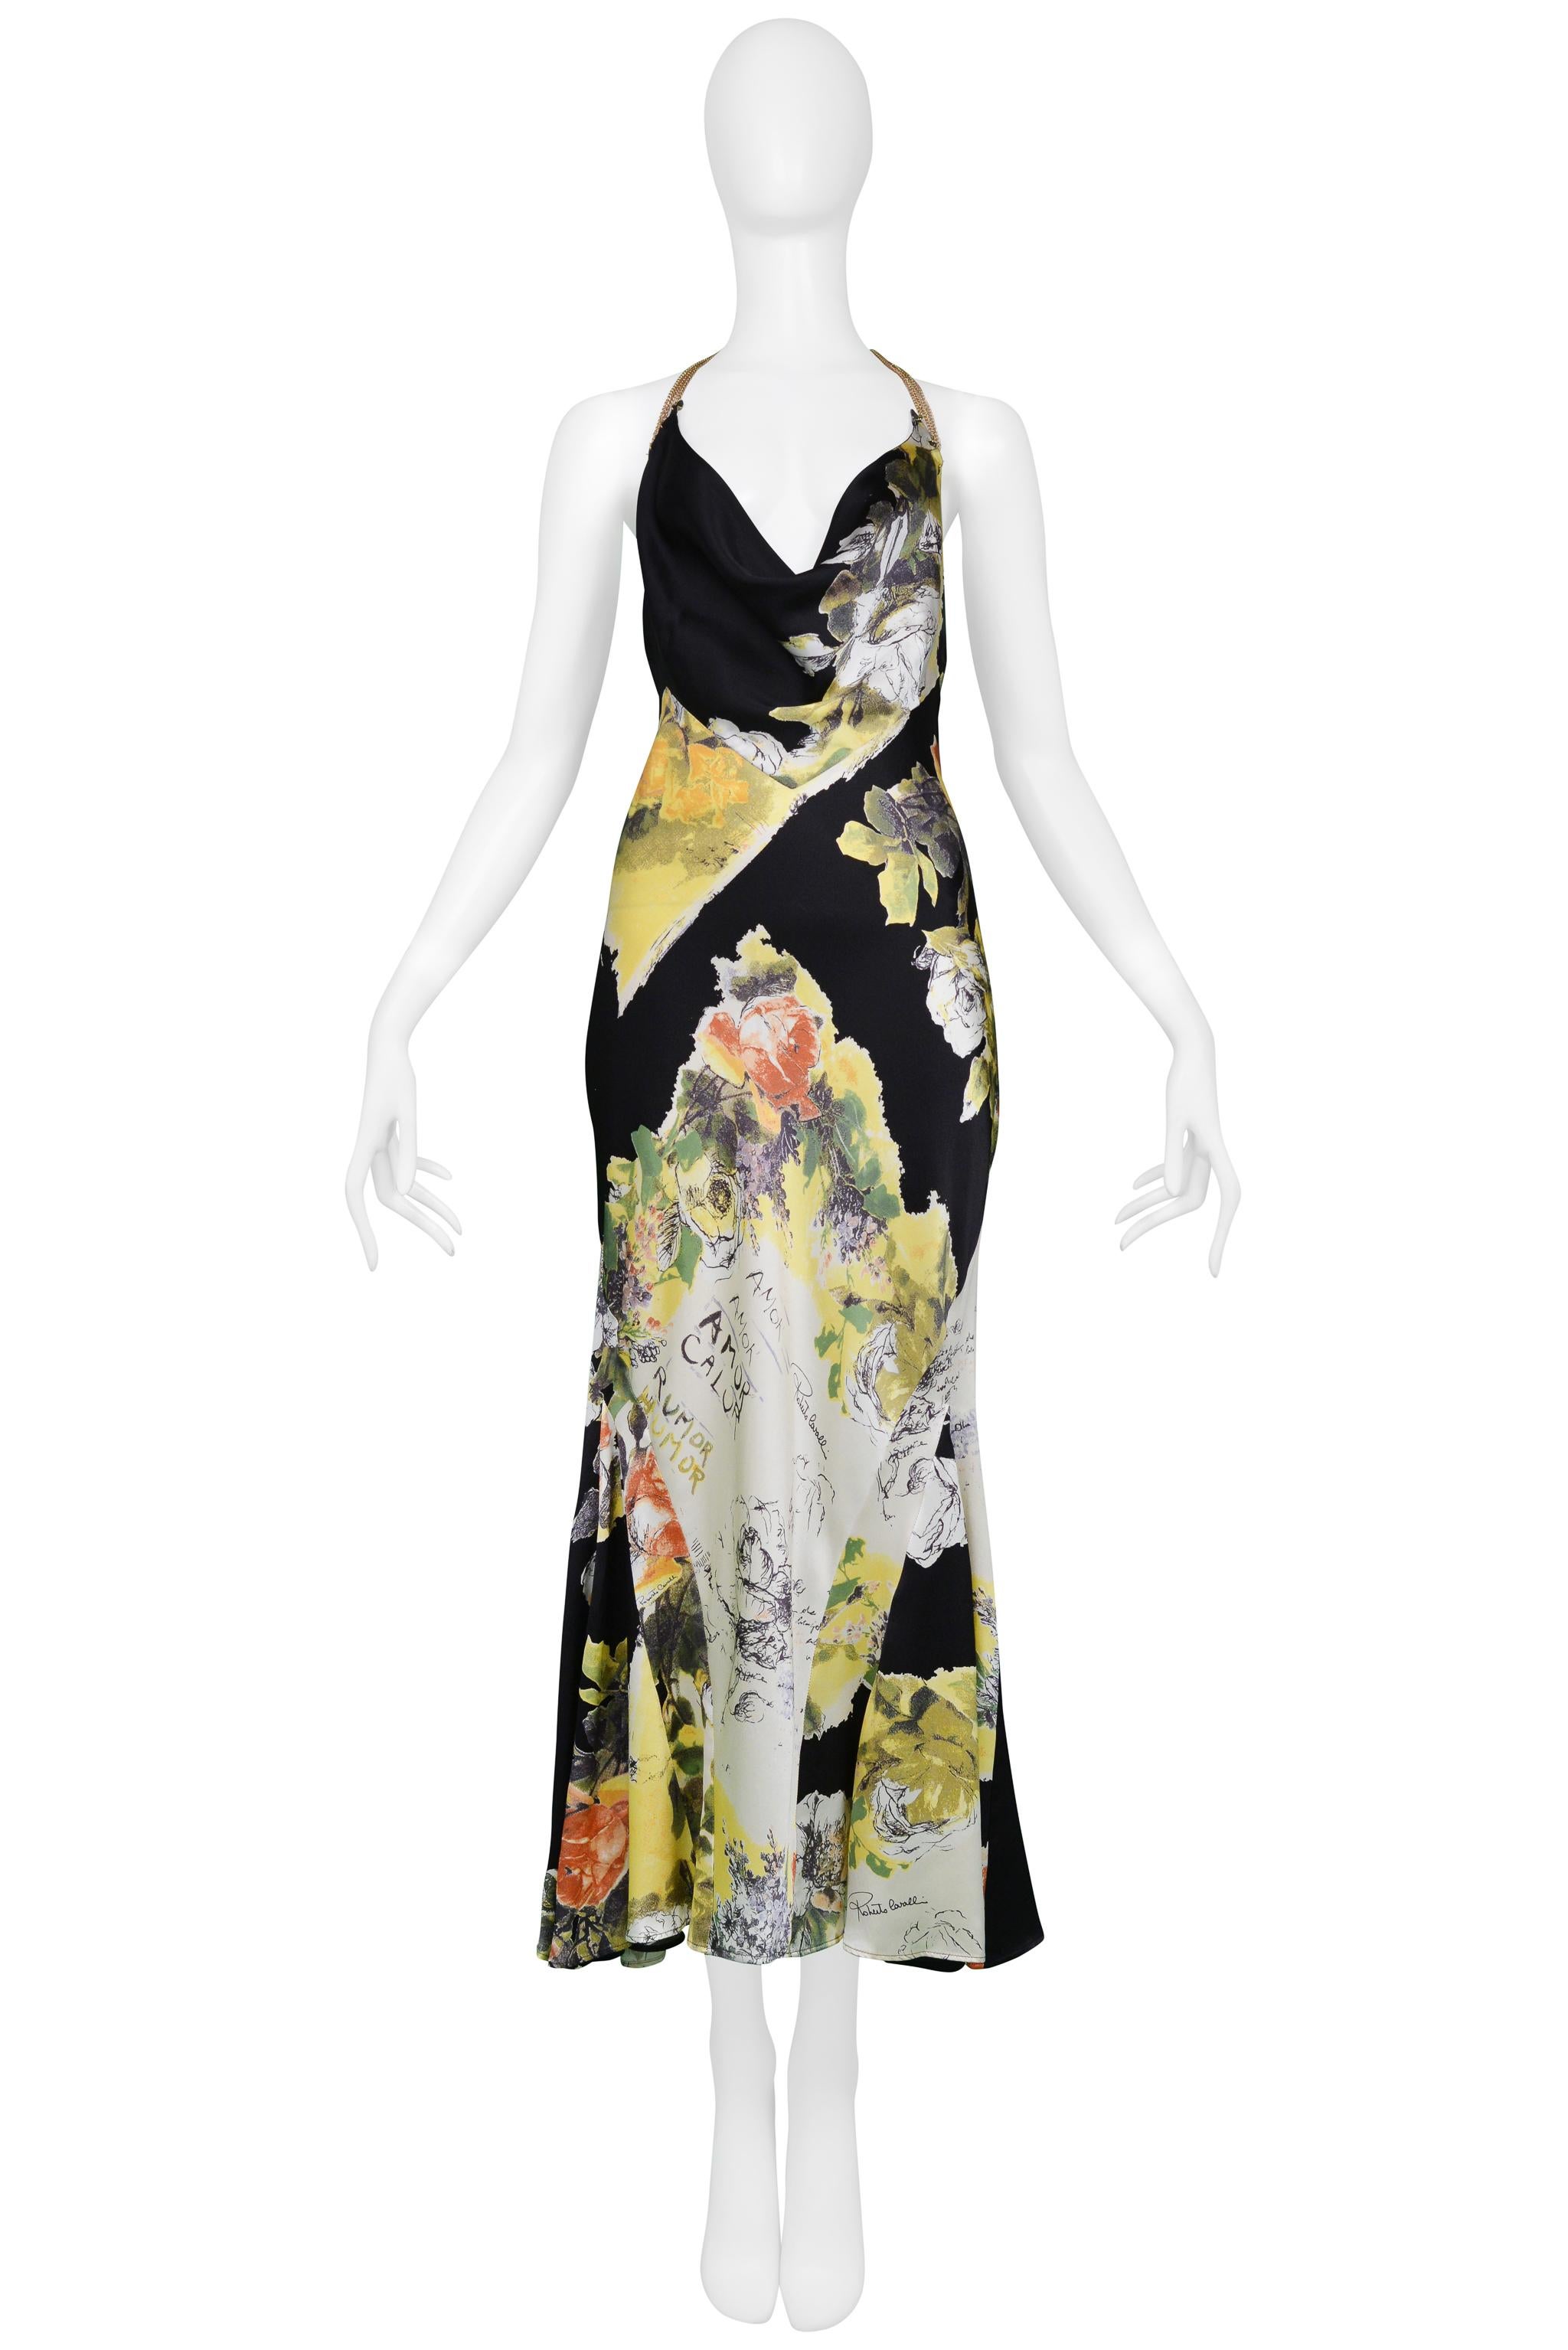 Resurrection Vintage is excited to present a vintage Roberto Cavalli black yellow, and white silk slip dress with a decorative floral print featuring 